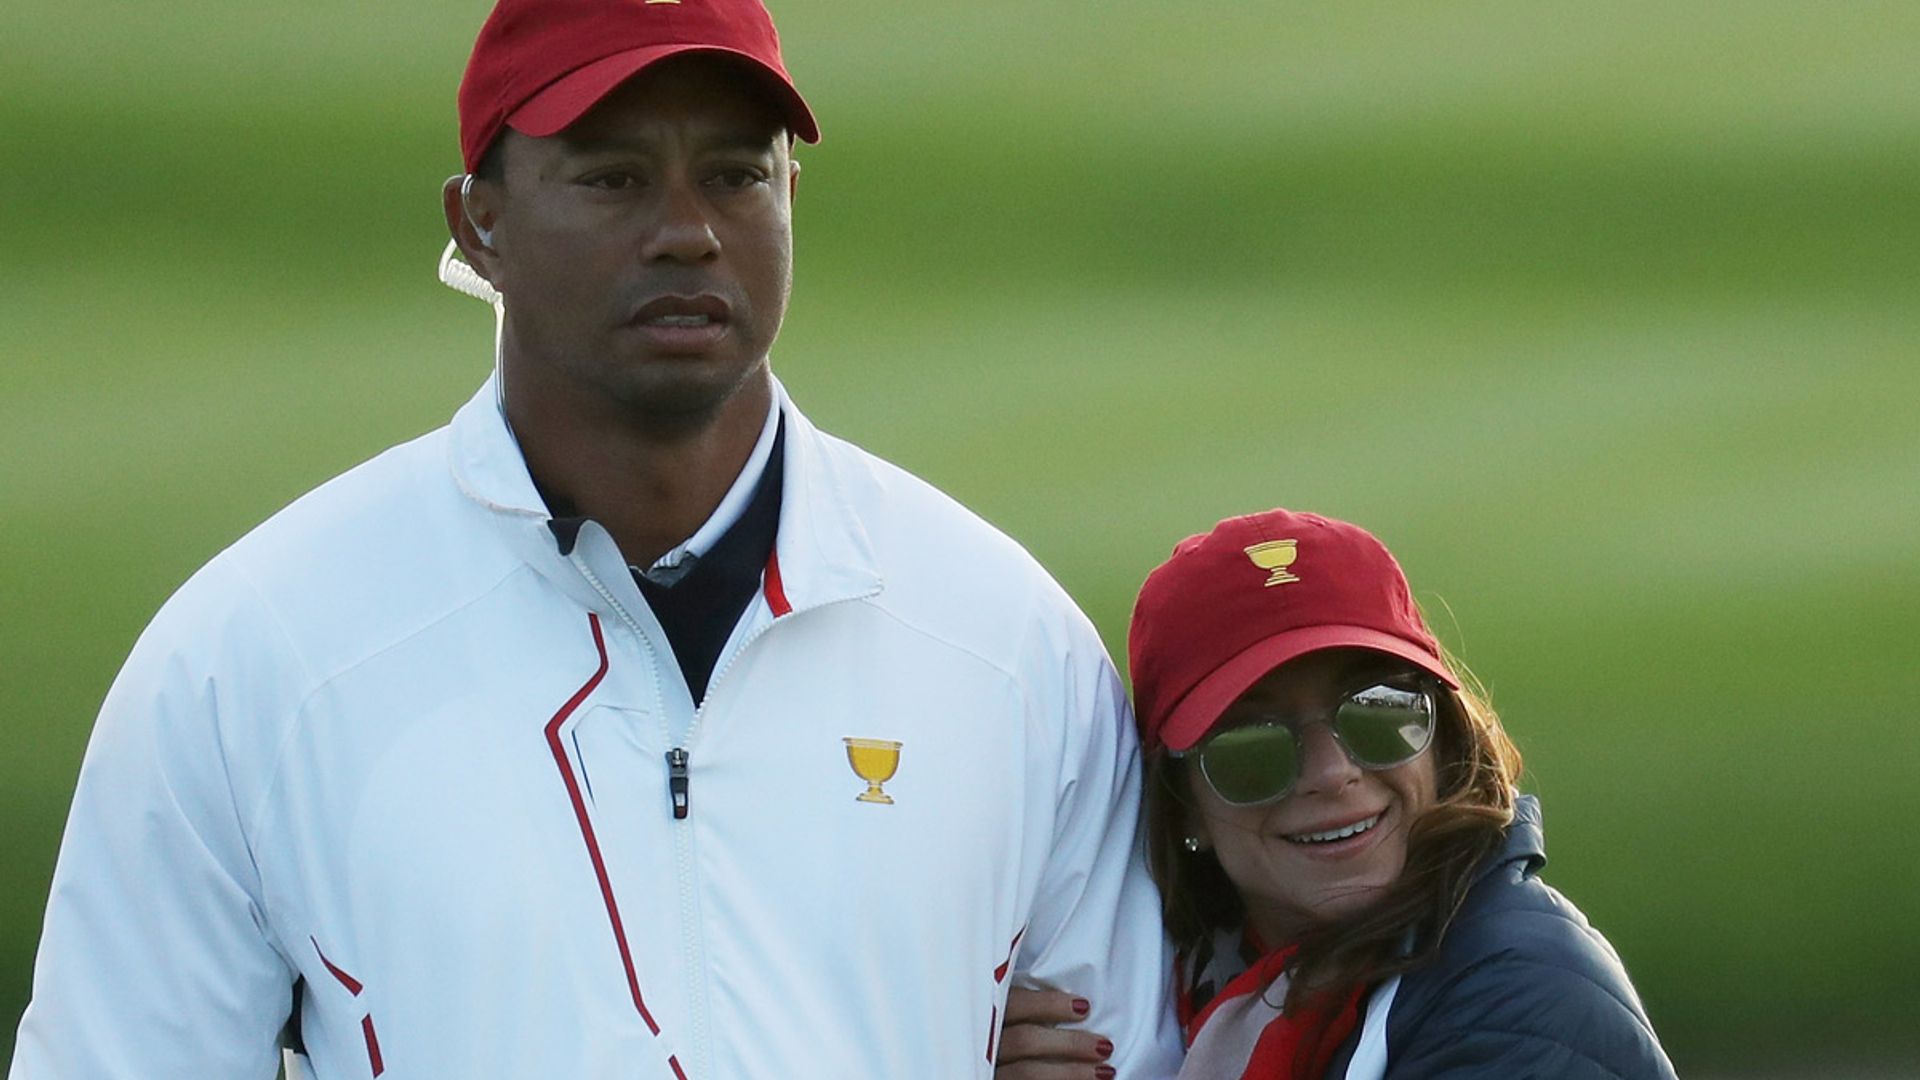 Tiger Woods actually met rumored fiancee Erica Herman years ago – in a relationship